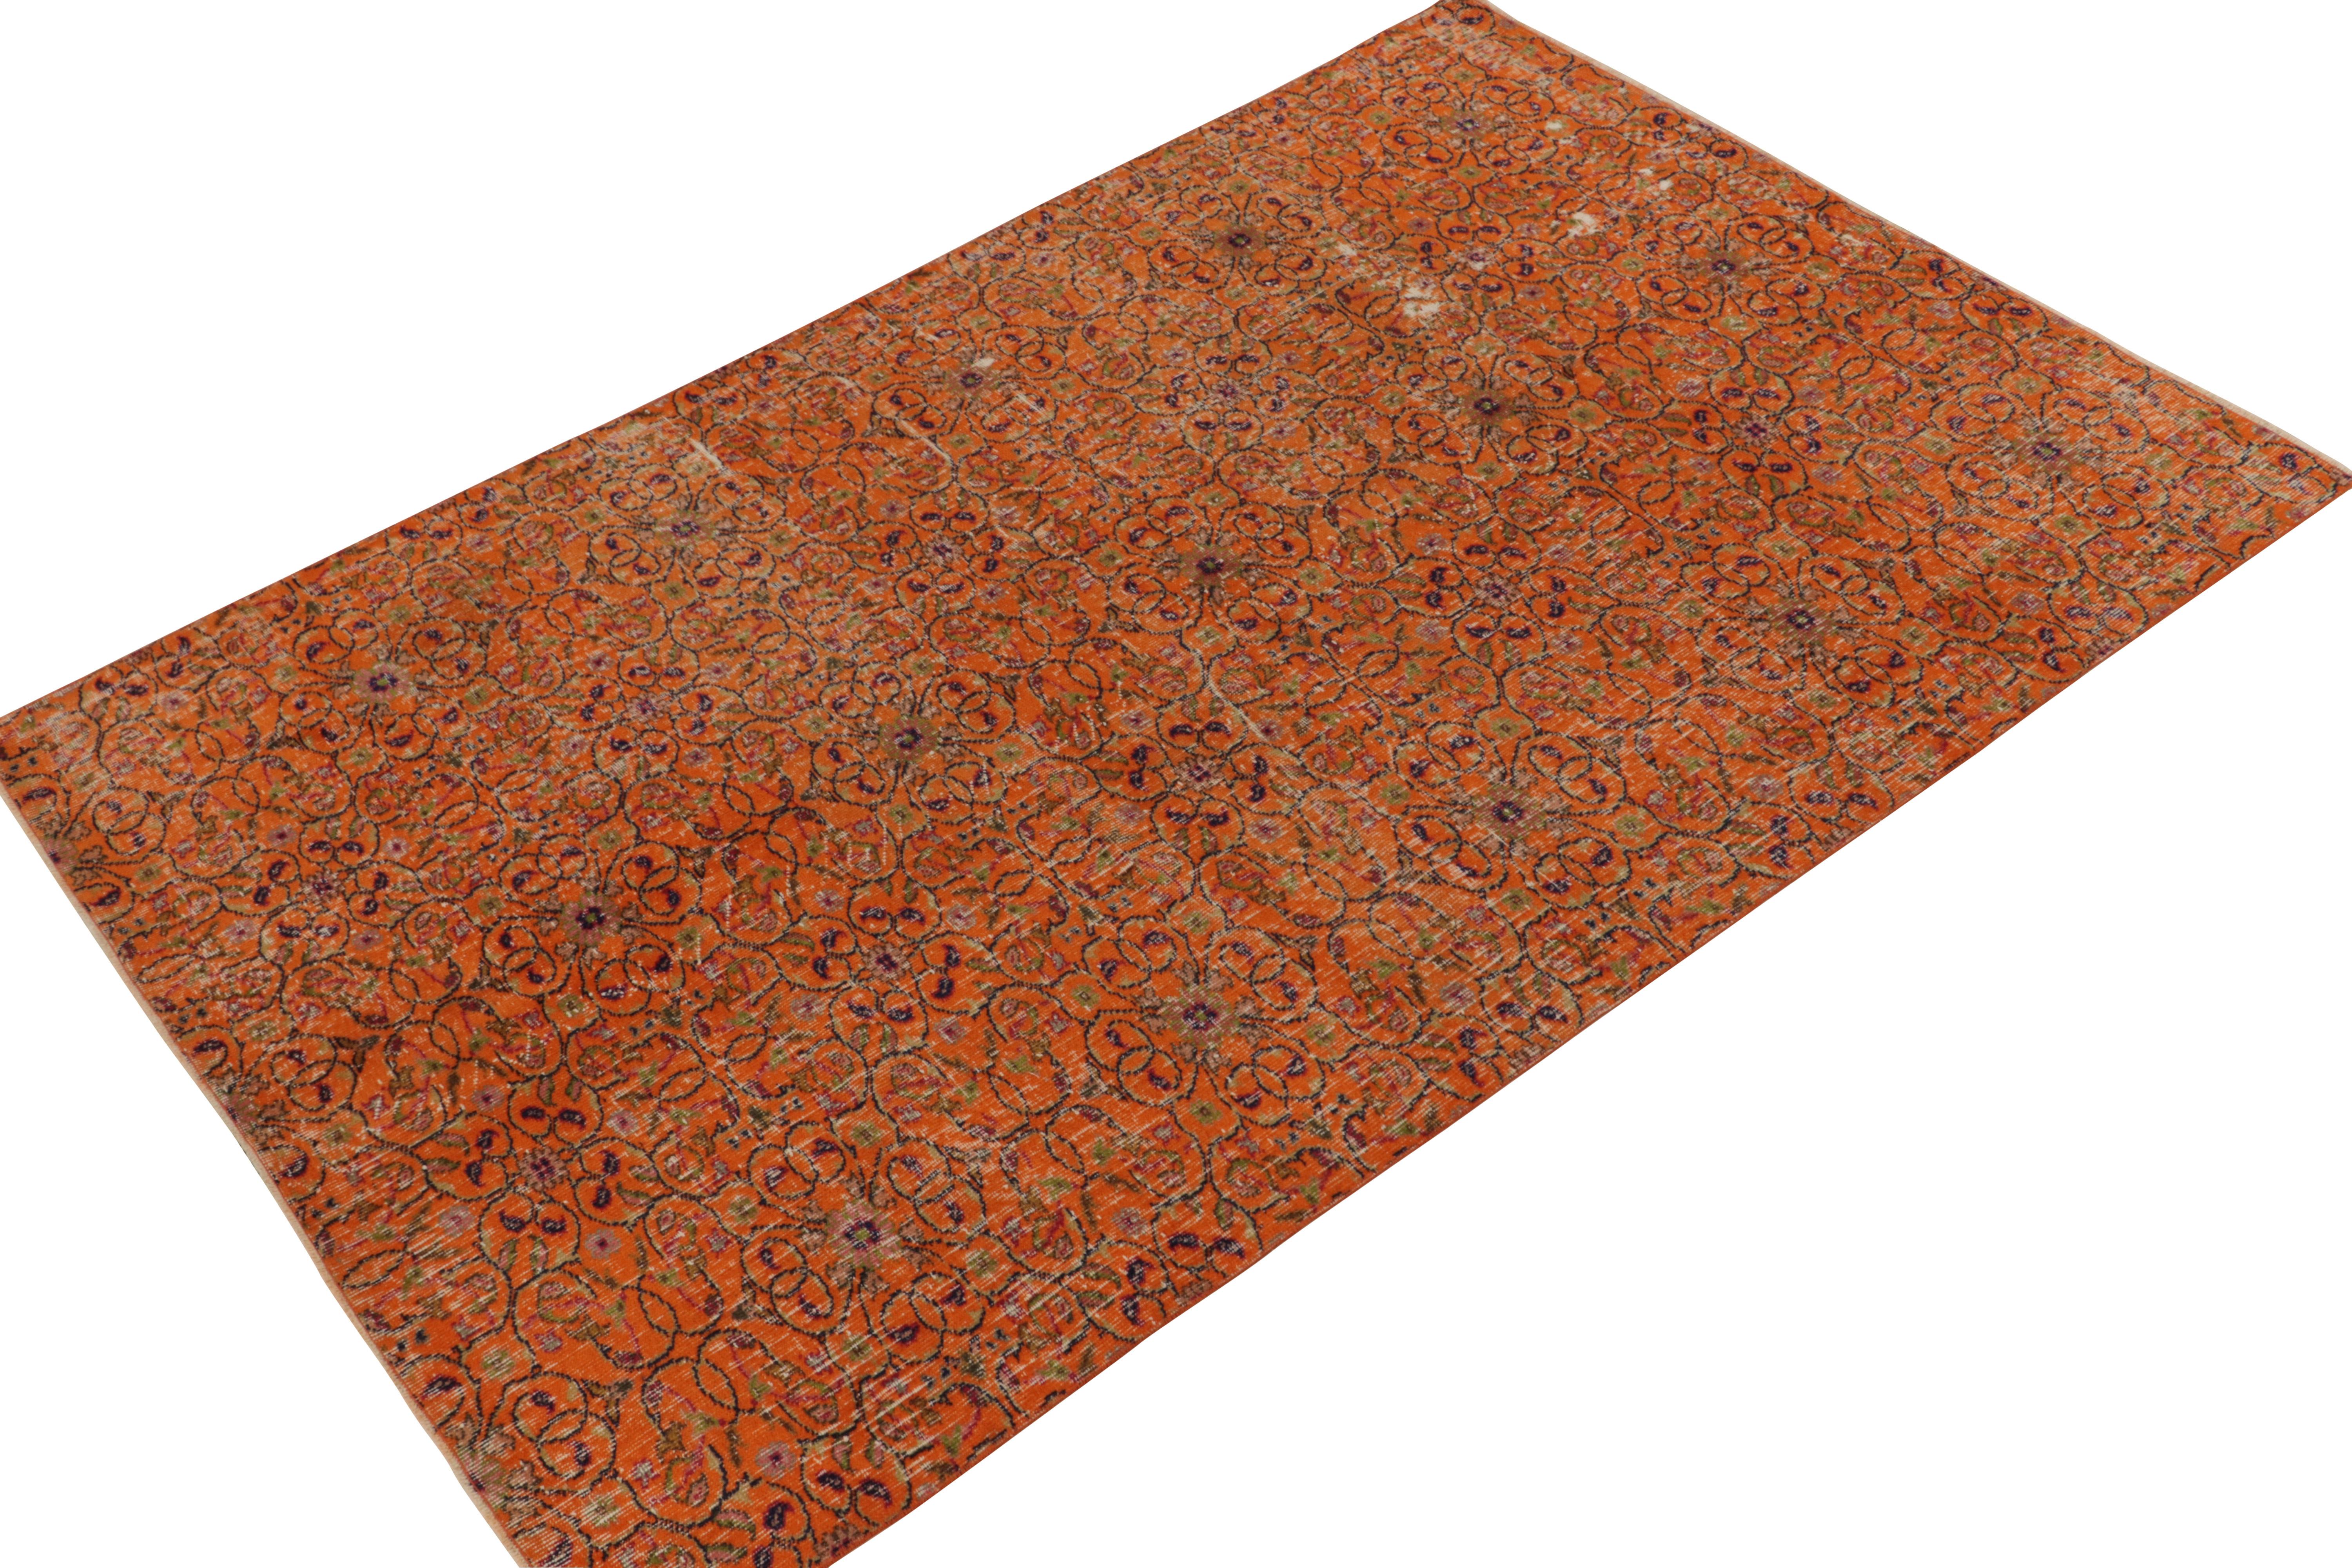 Hand-knotted in wool, a 6x9 vintage rug from a coveted Turkish designer, entering Rug & Kilim’s commemorative Mid-Century Pasha Collection. 

The 1960s take on Deco style relishes a geometric pattern in a rare colorway of orange playing